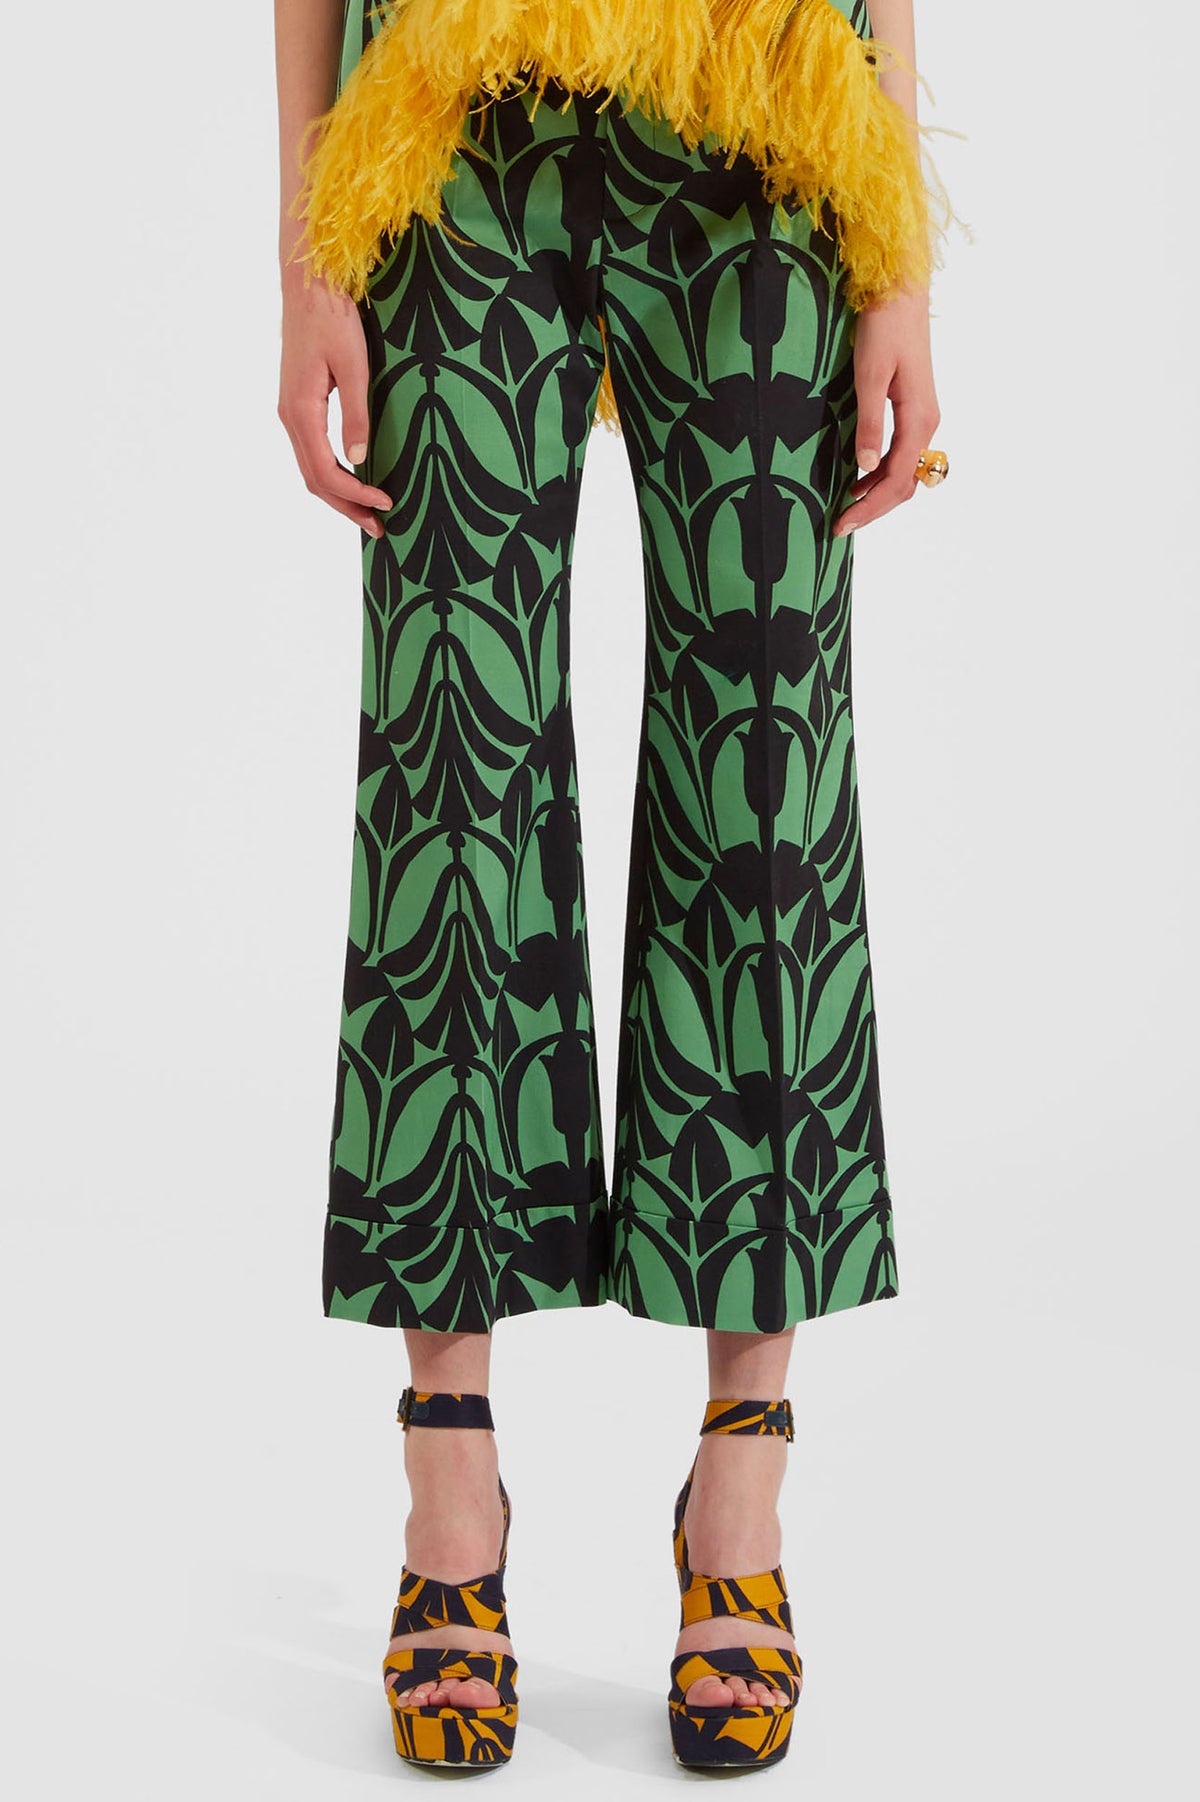 Hendrix Pants in Papyrus